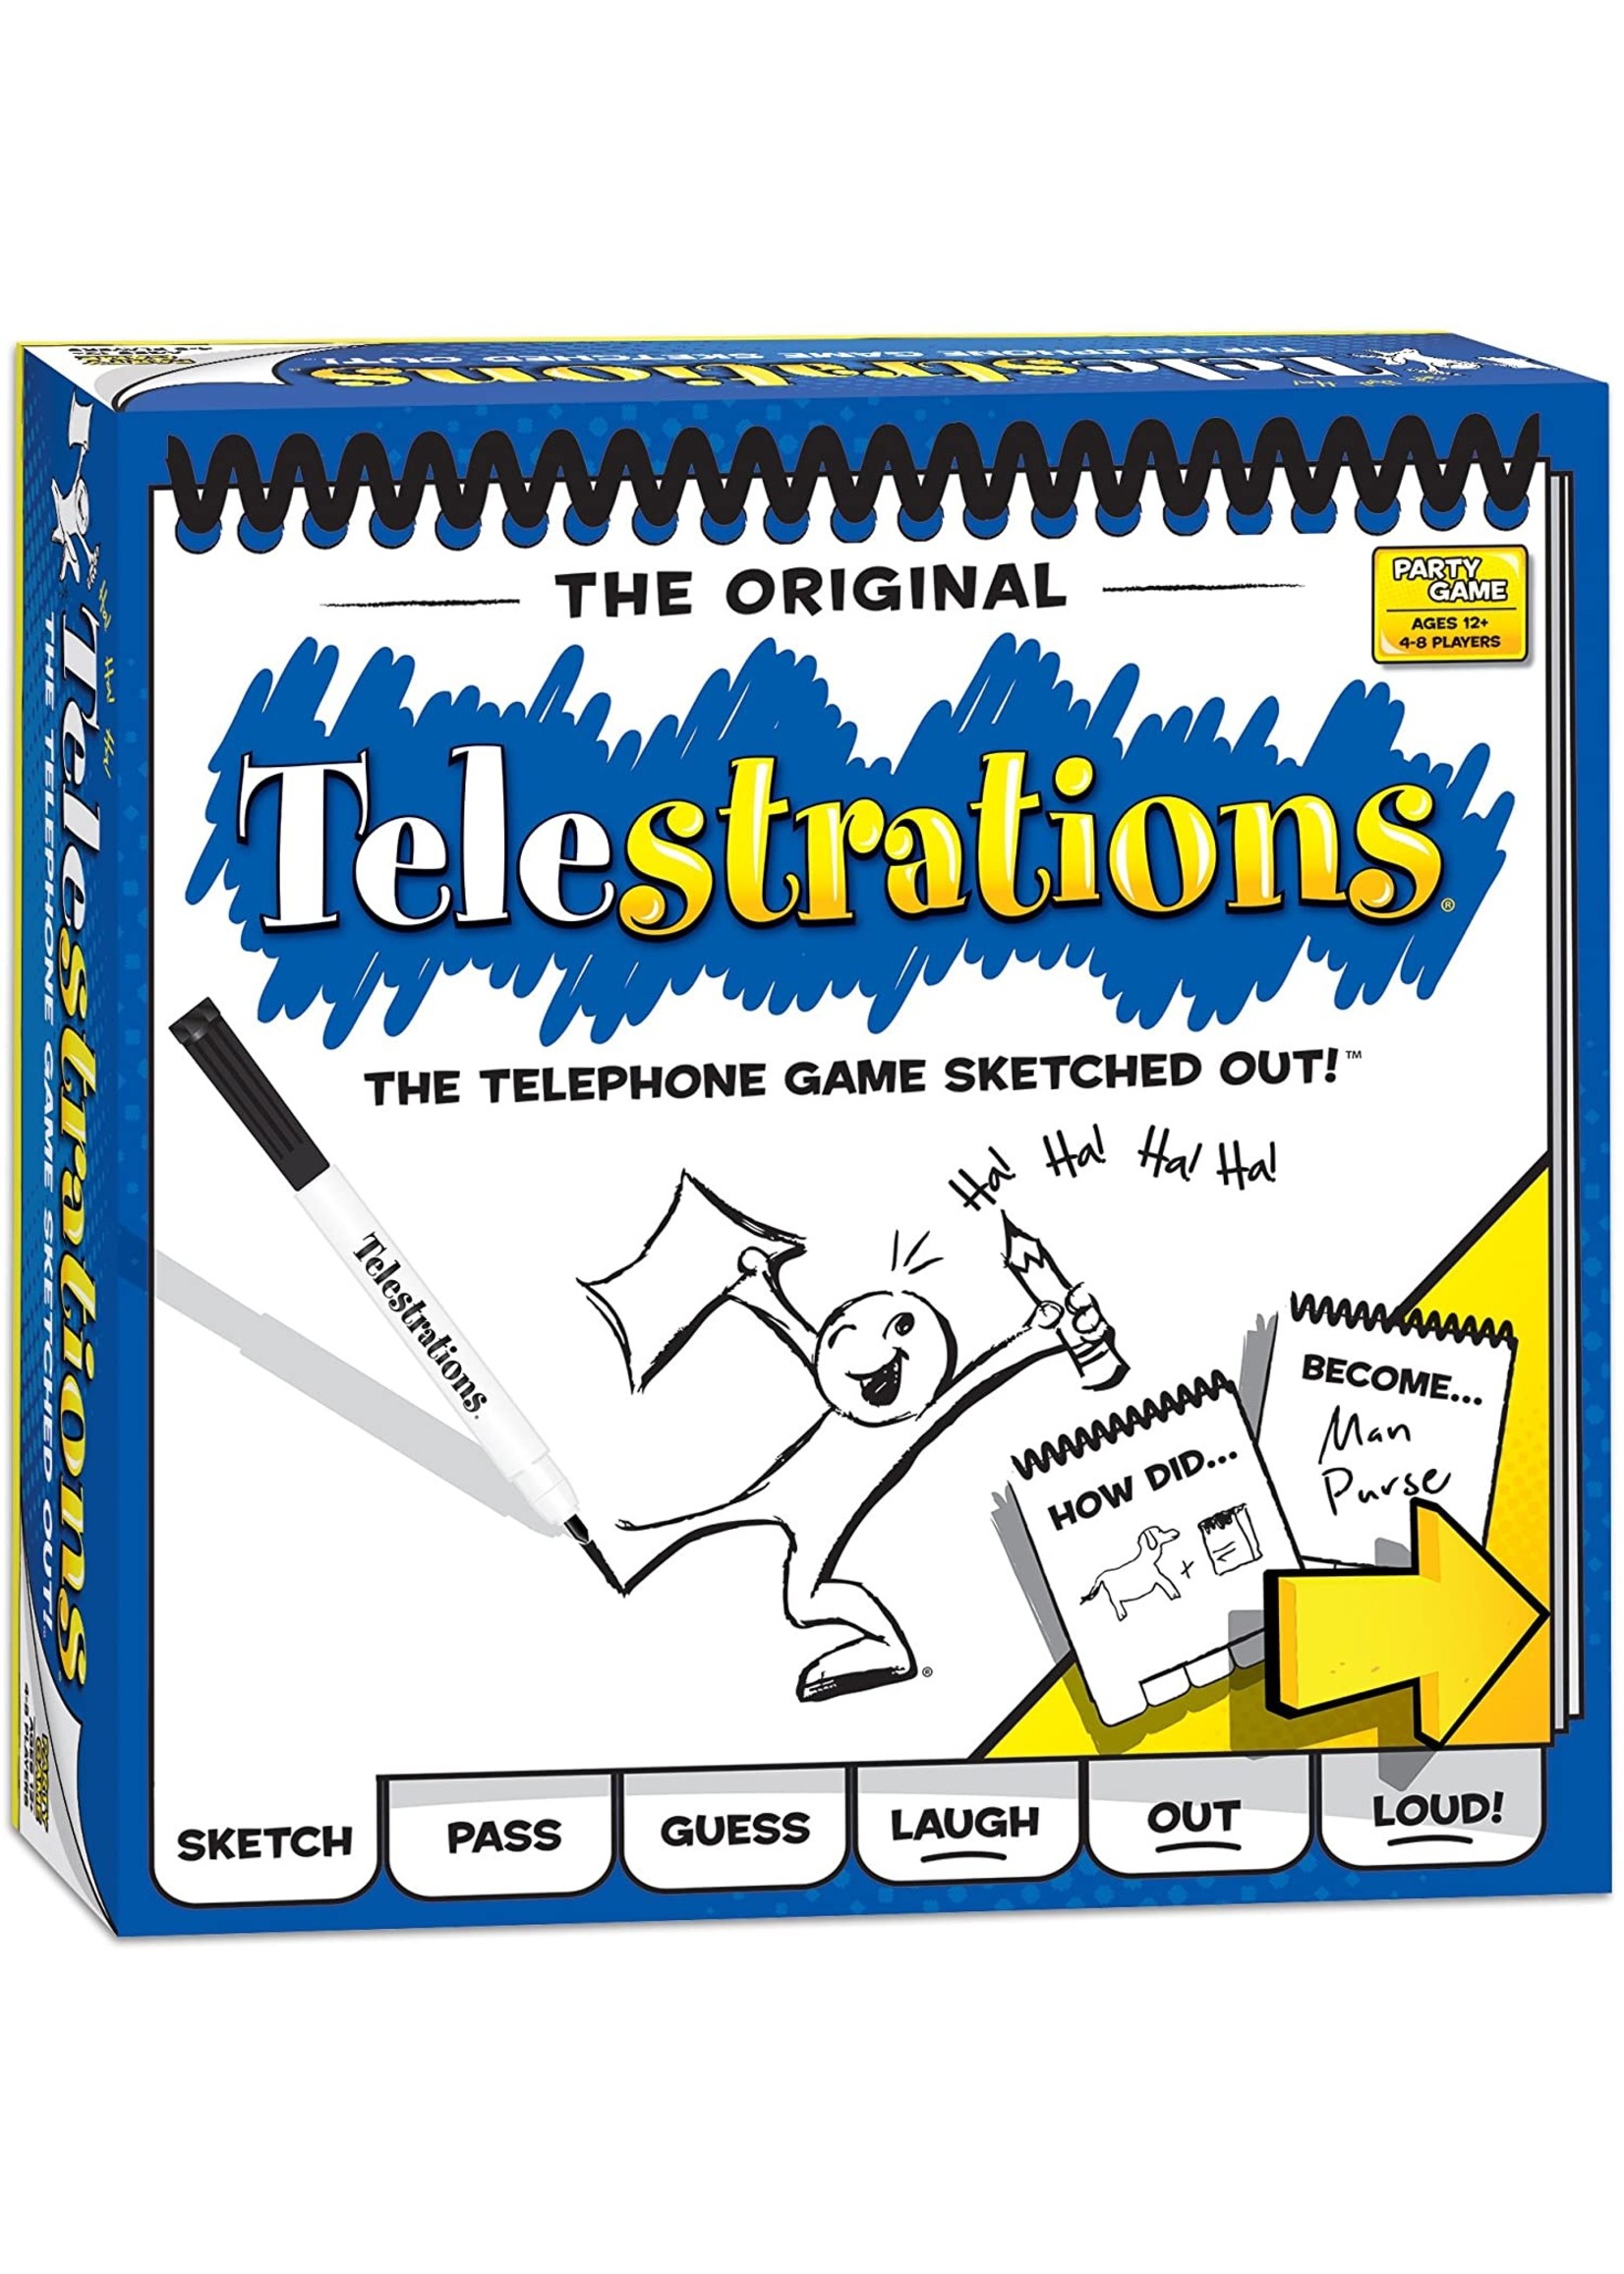 USAopoly Telestrations